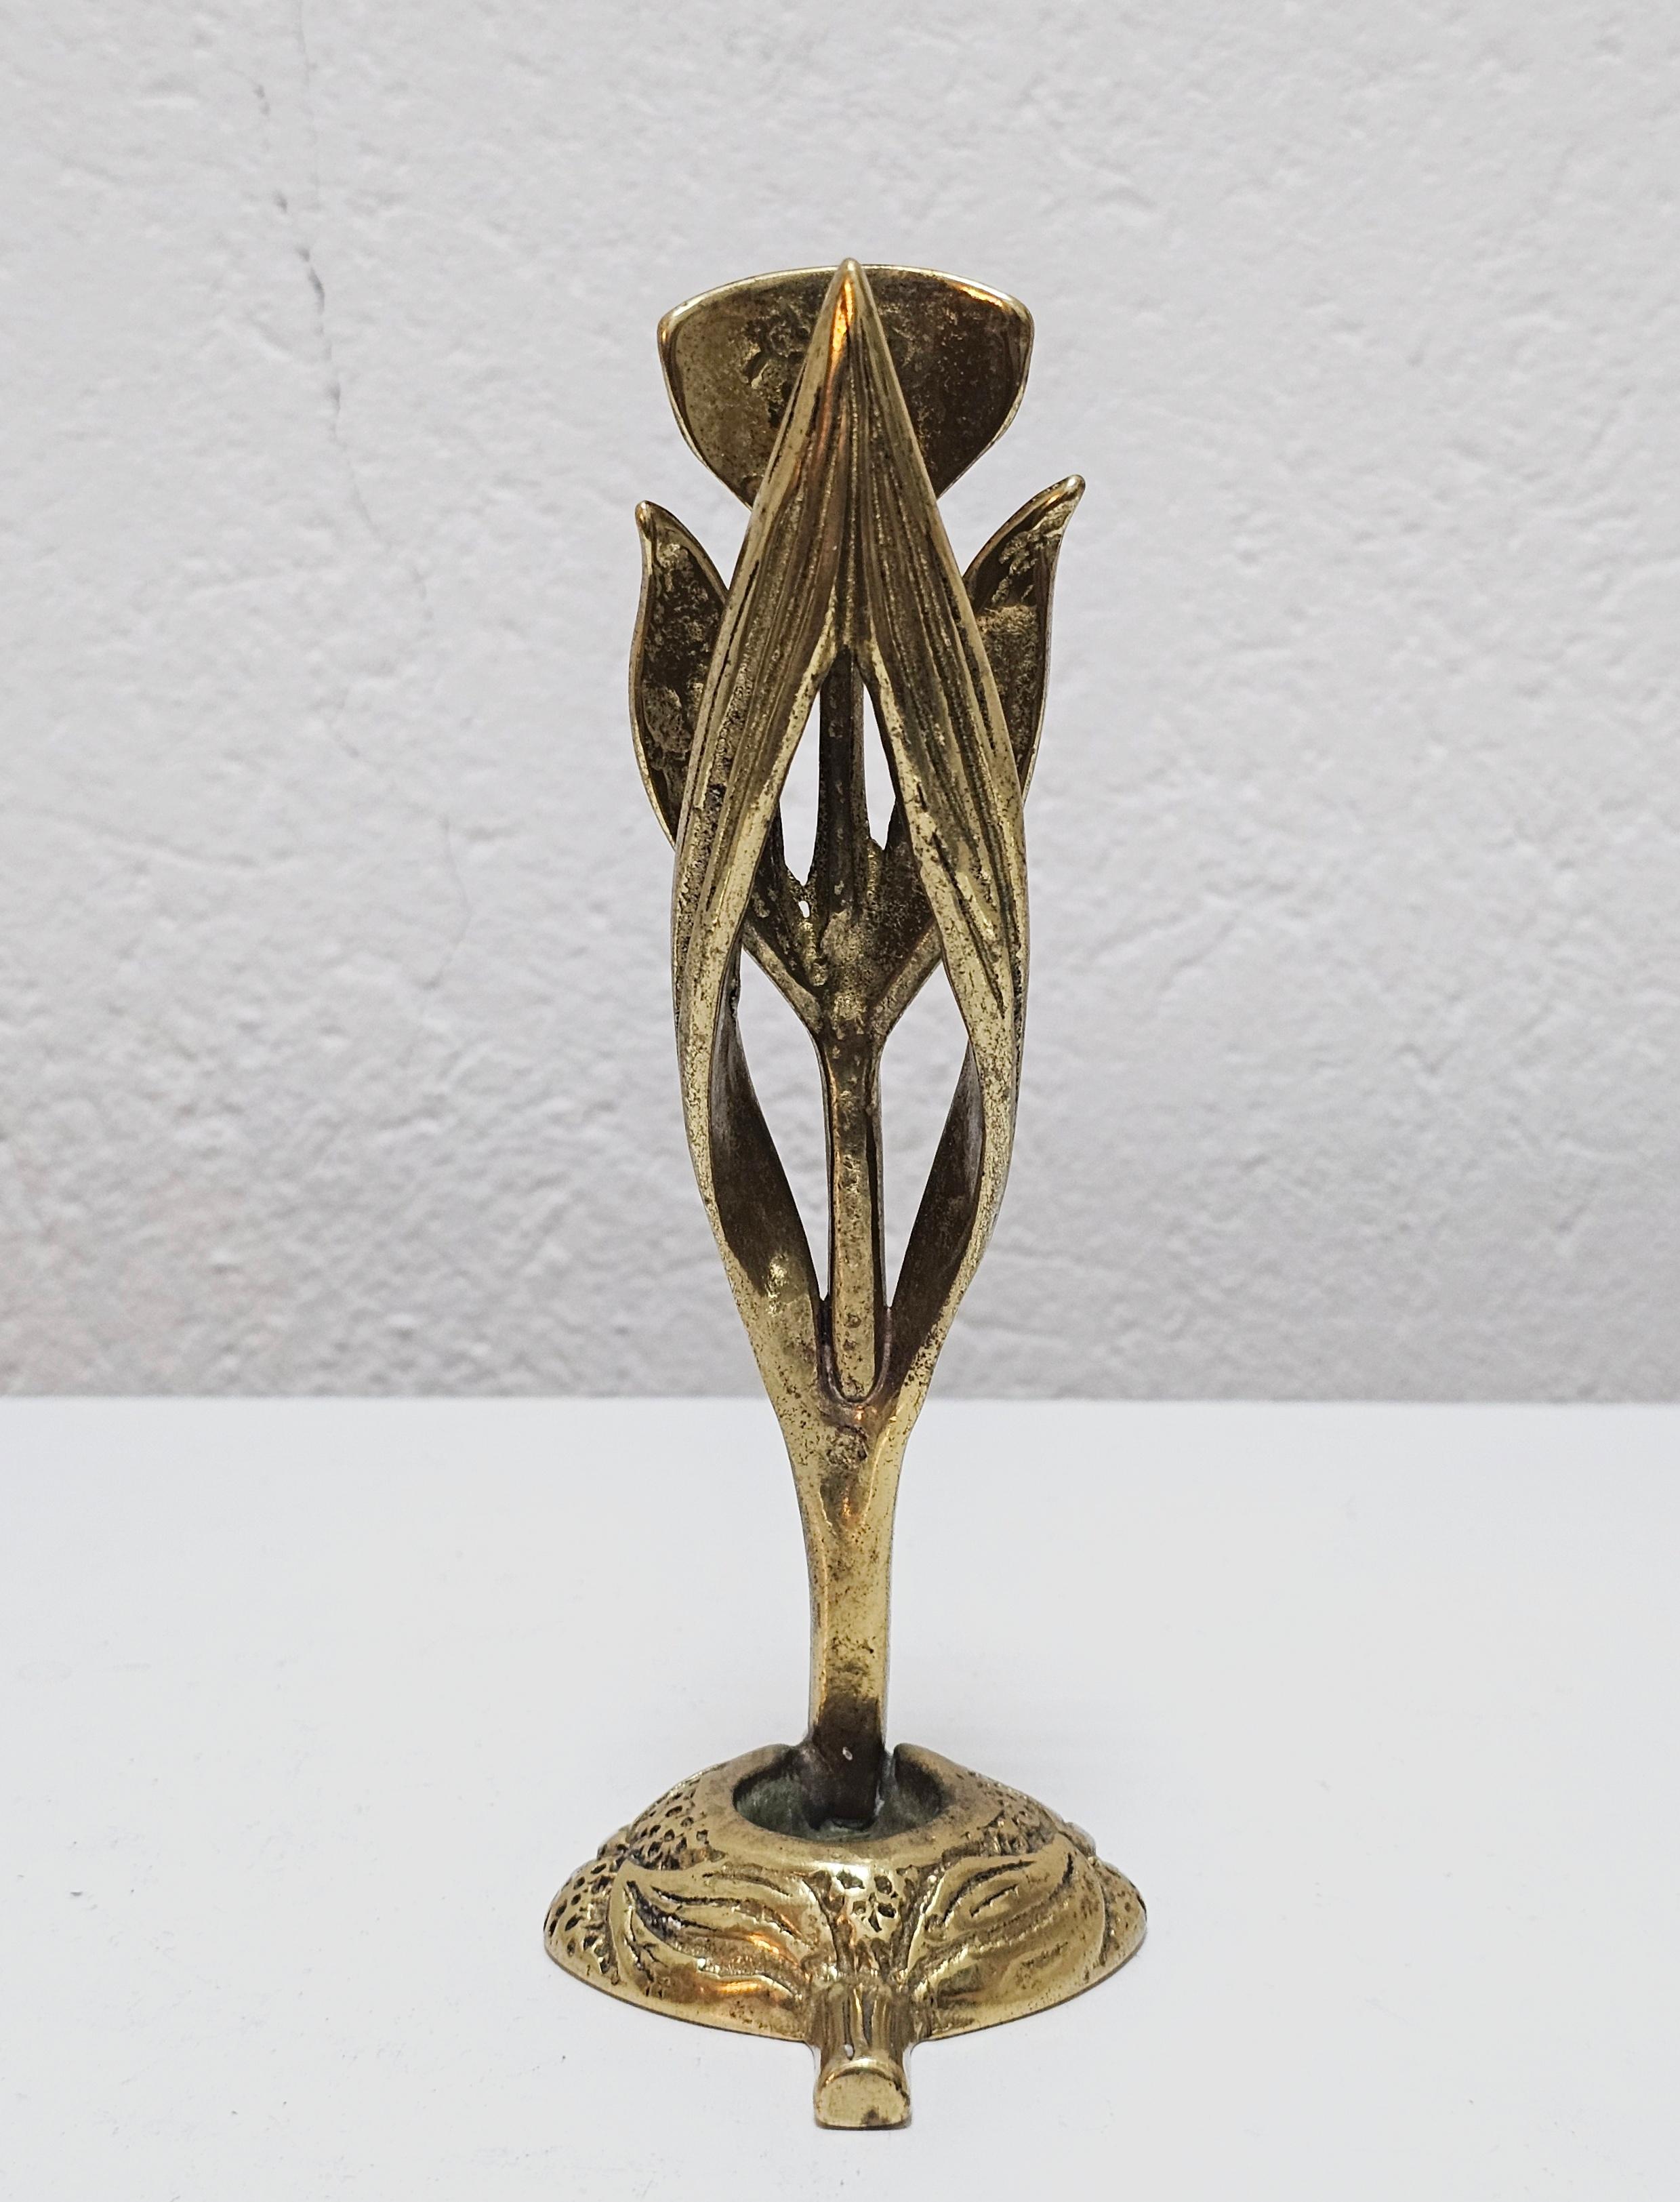 In this listing you will find an extremely rare and absolutely extraordinary sculptural Brutalist candle holder done in gilt bronze, shaped as Iris flower. It was designed by Austrian designer Heinz Goll, who's work is often found at auctions in